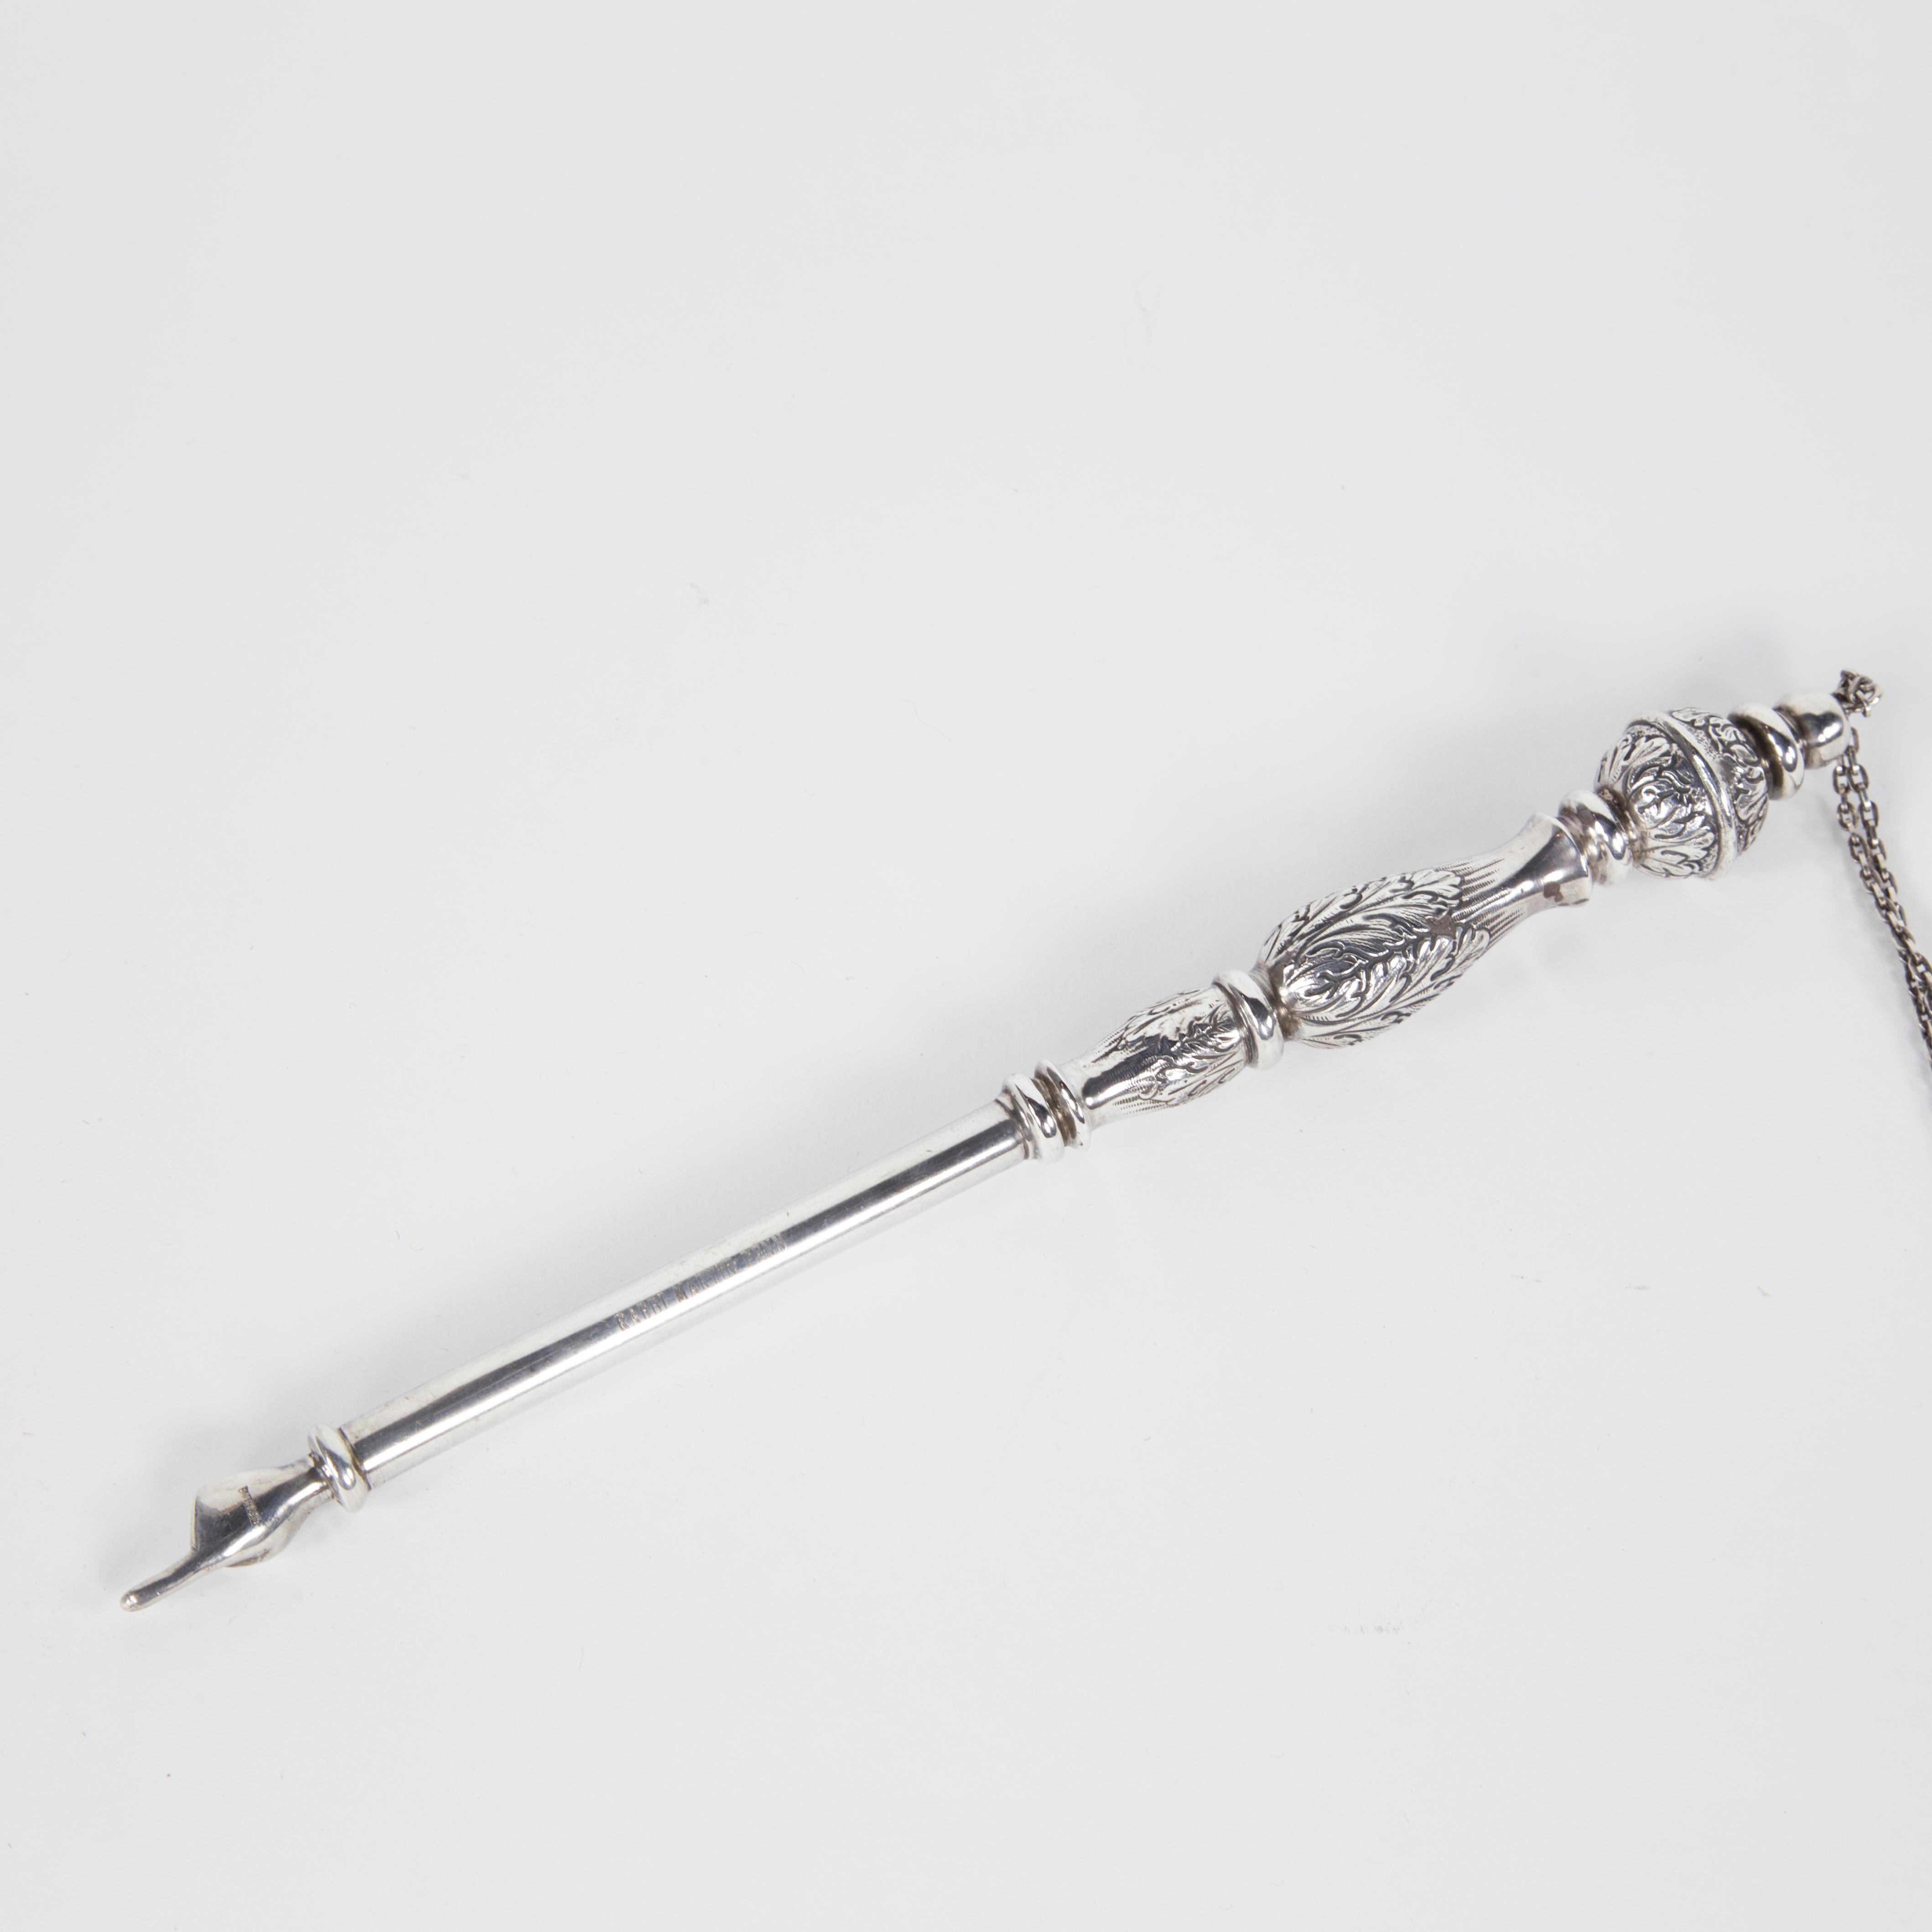 A fine and impressive Jewish Yad known as a Torah pointer handcrafted in sterling silver; bulbous knob handle decorated with embossed acanthus leave designs, with a traditional pointed finger hand on the other end. Marked: RABBI MARTIN PENN. Yad